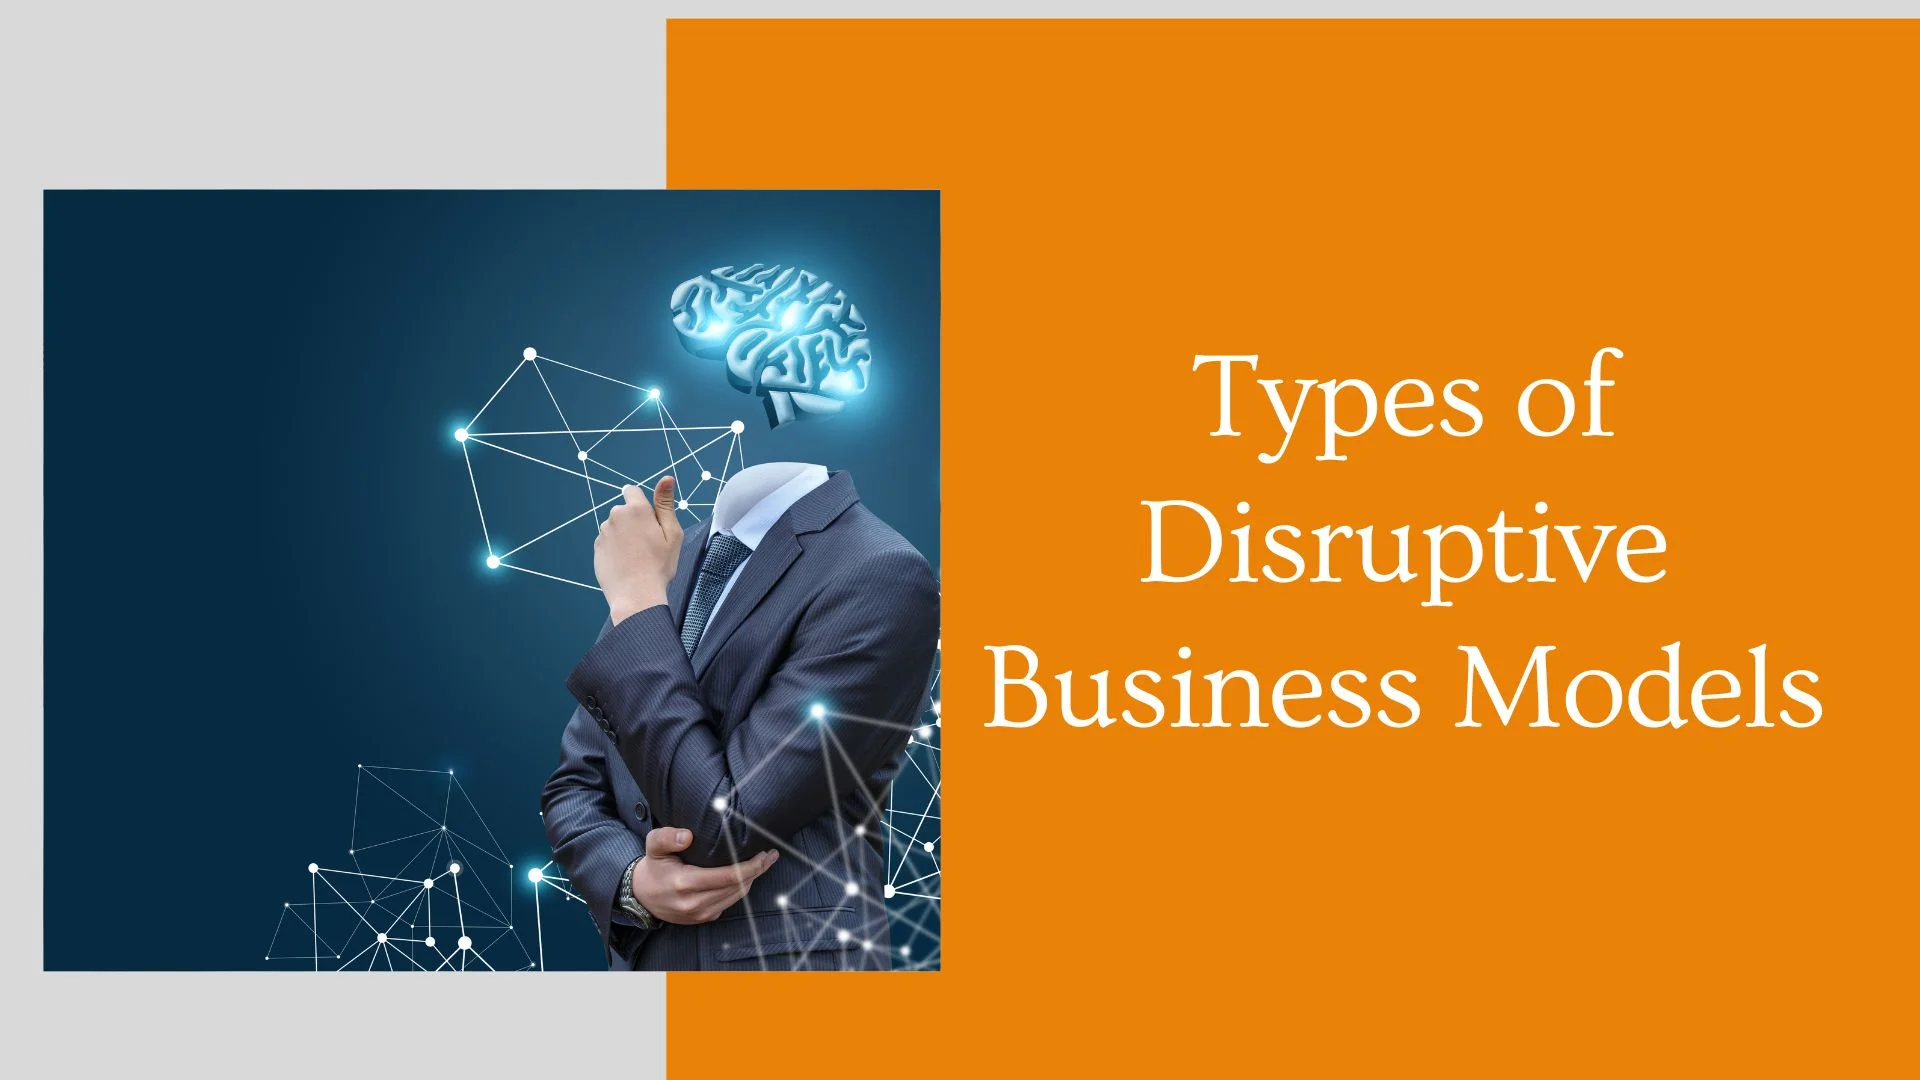 Types of Disruptive Business Models